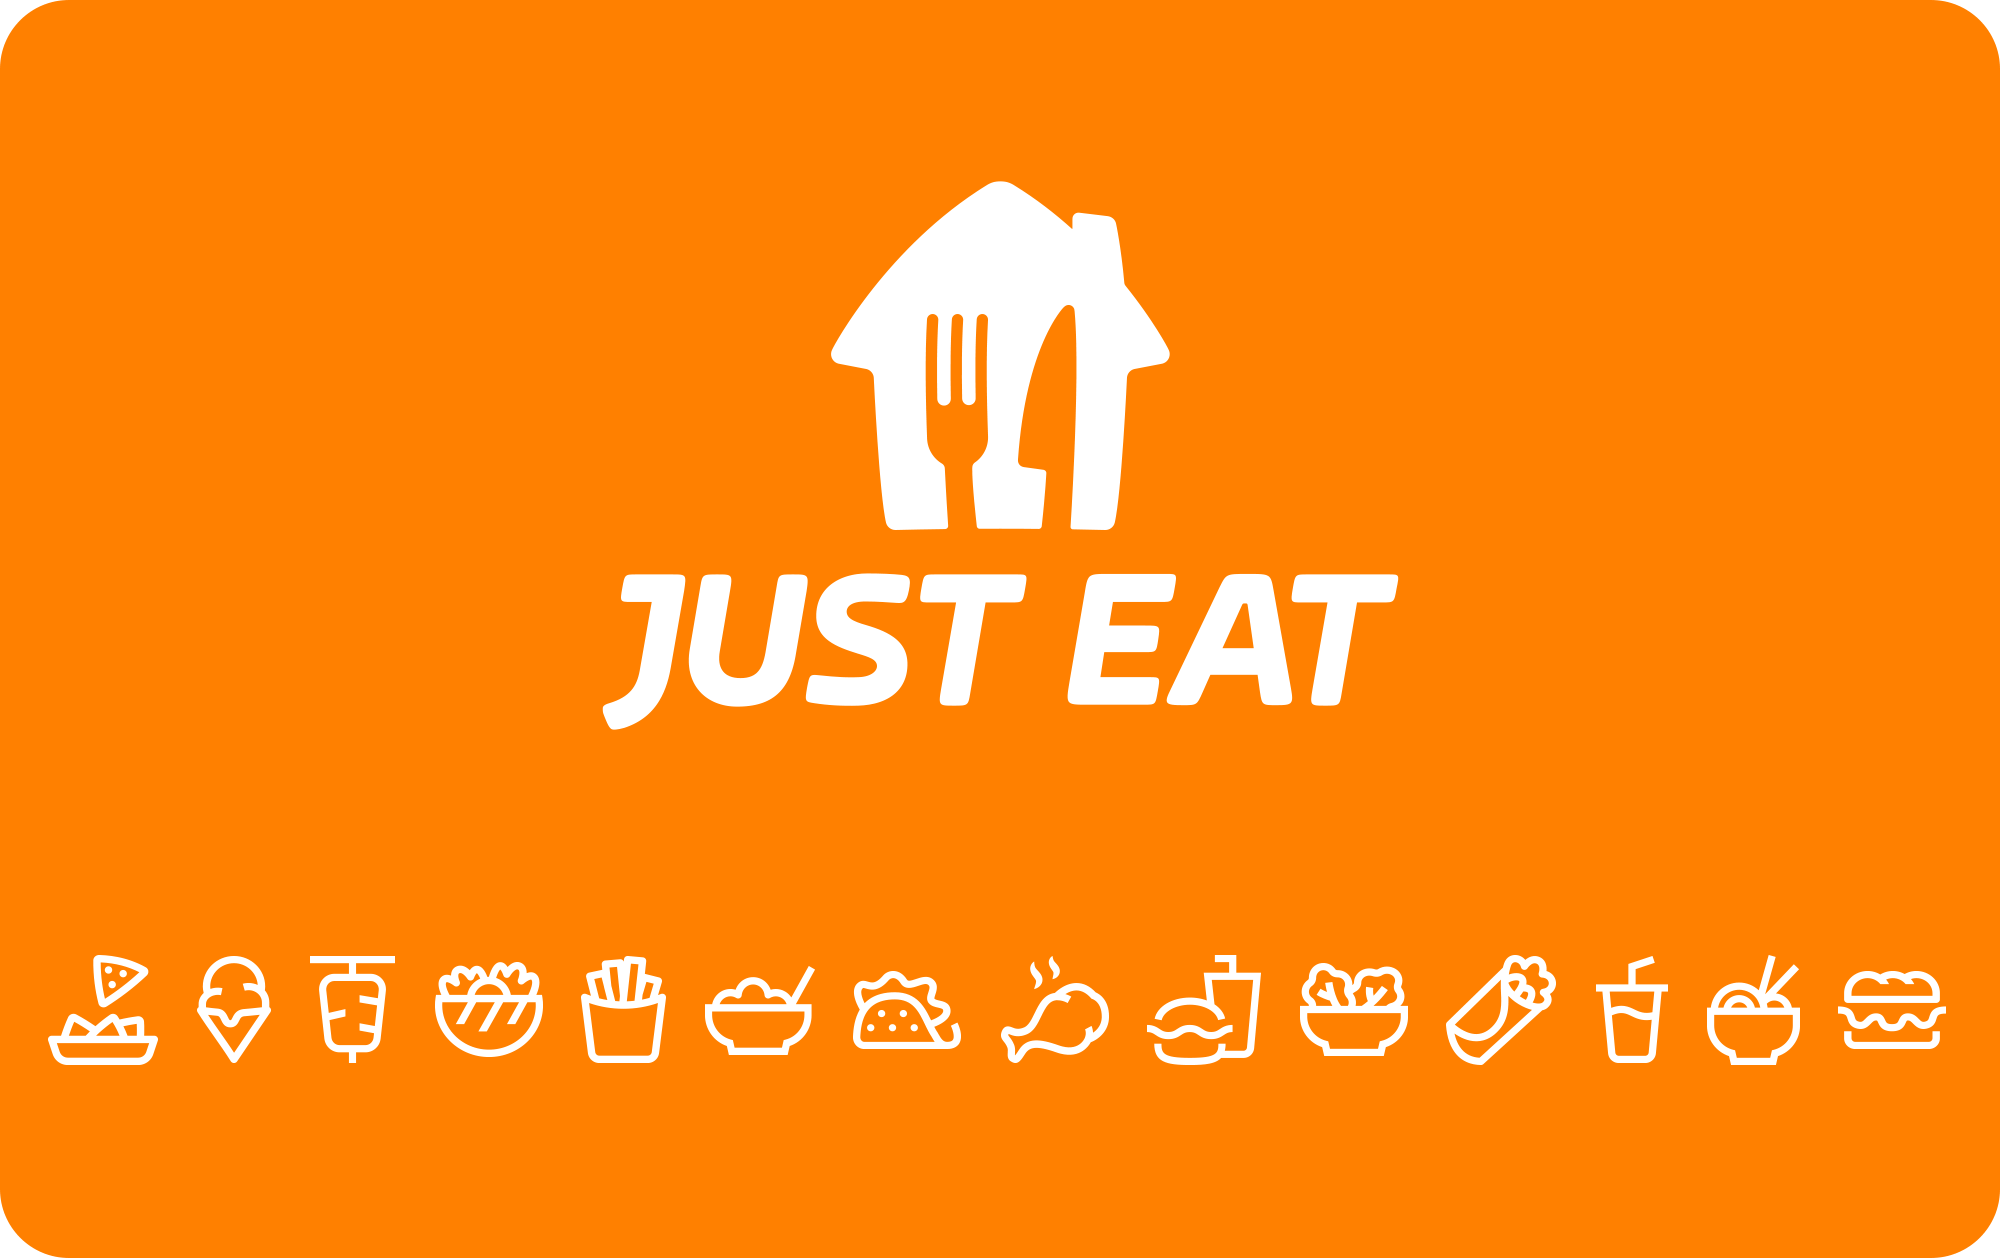 Just Eat £10 Gift Card UK $14.05